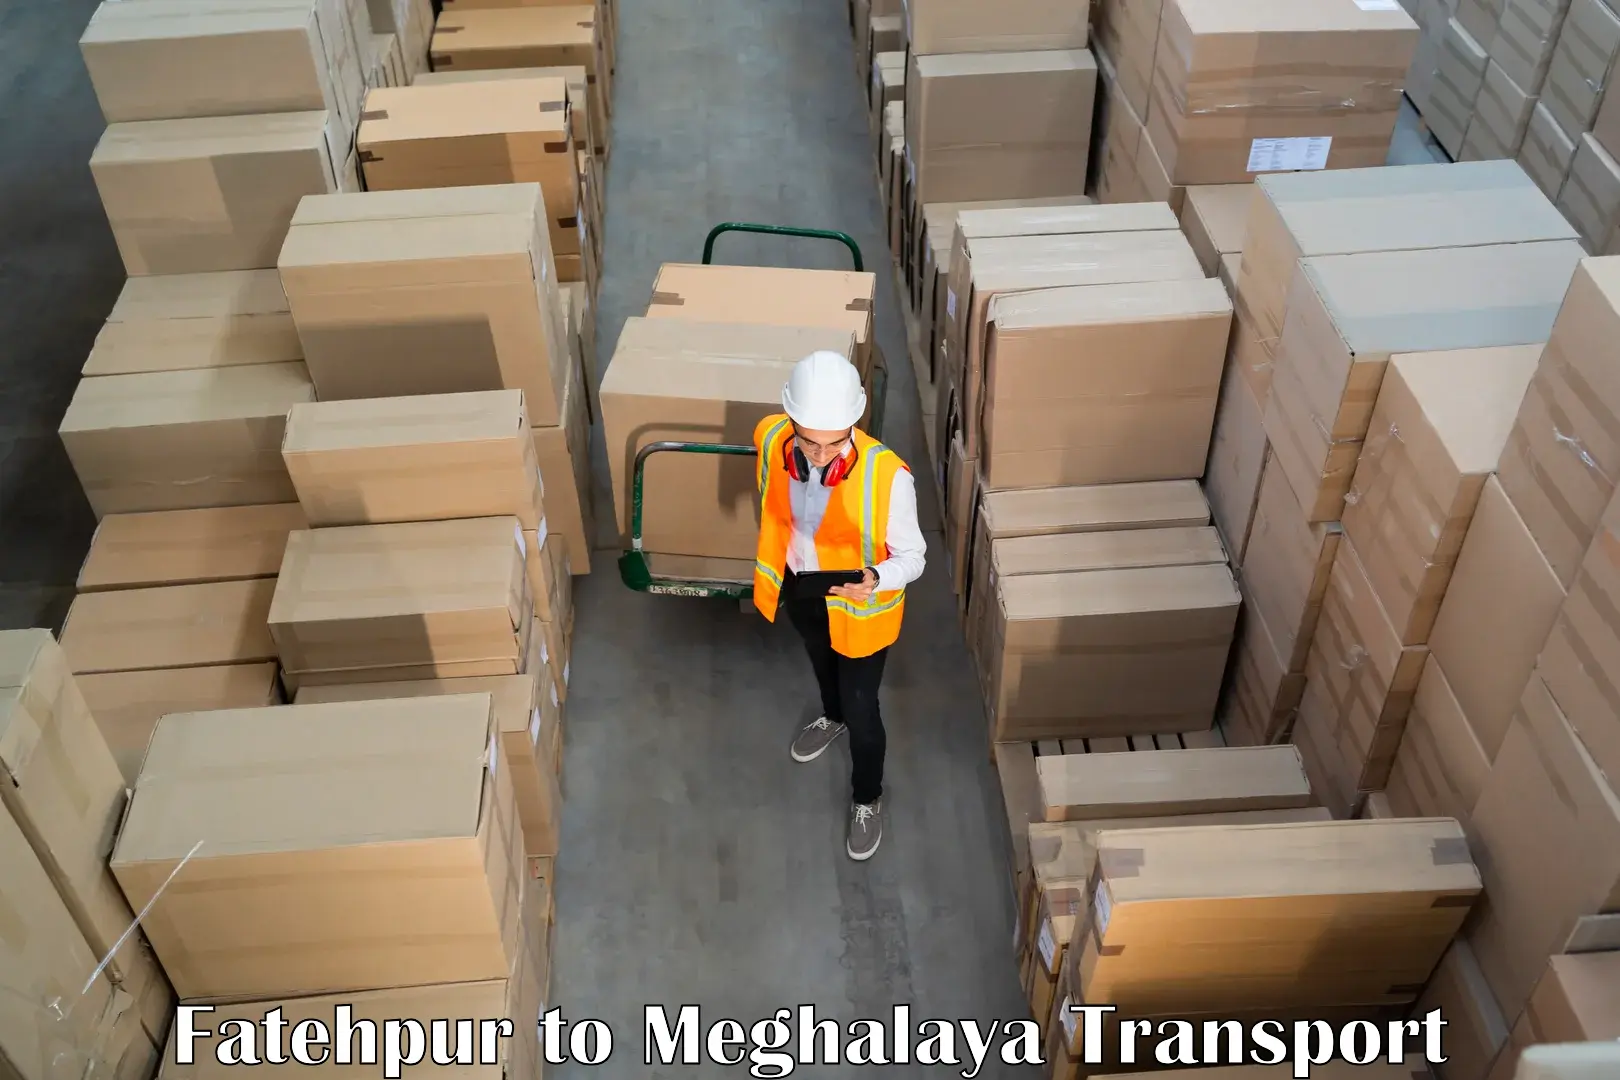 Truck transport companies in India Fatehpur to Dkhiah West